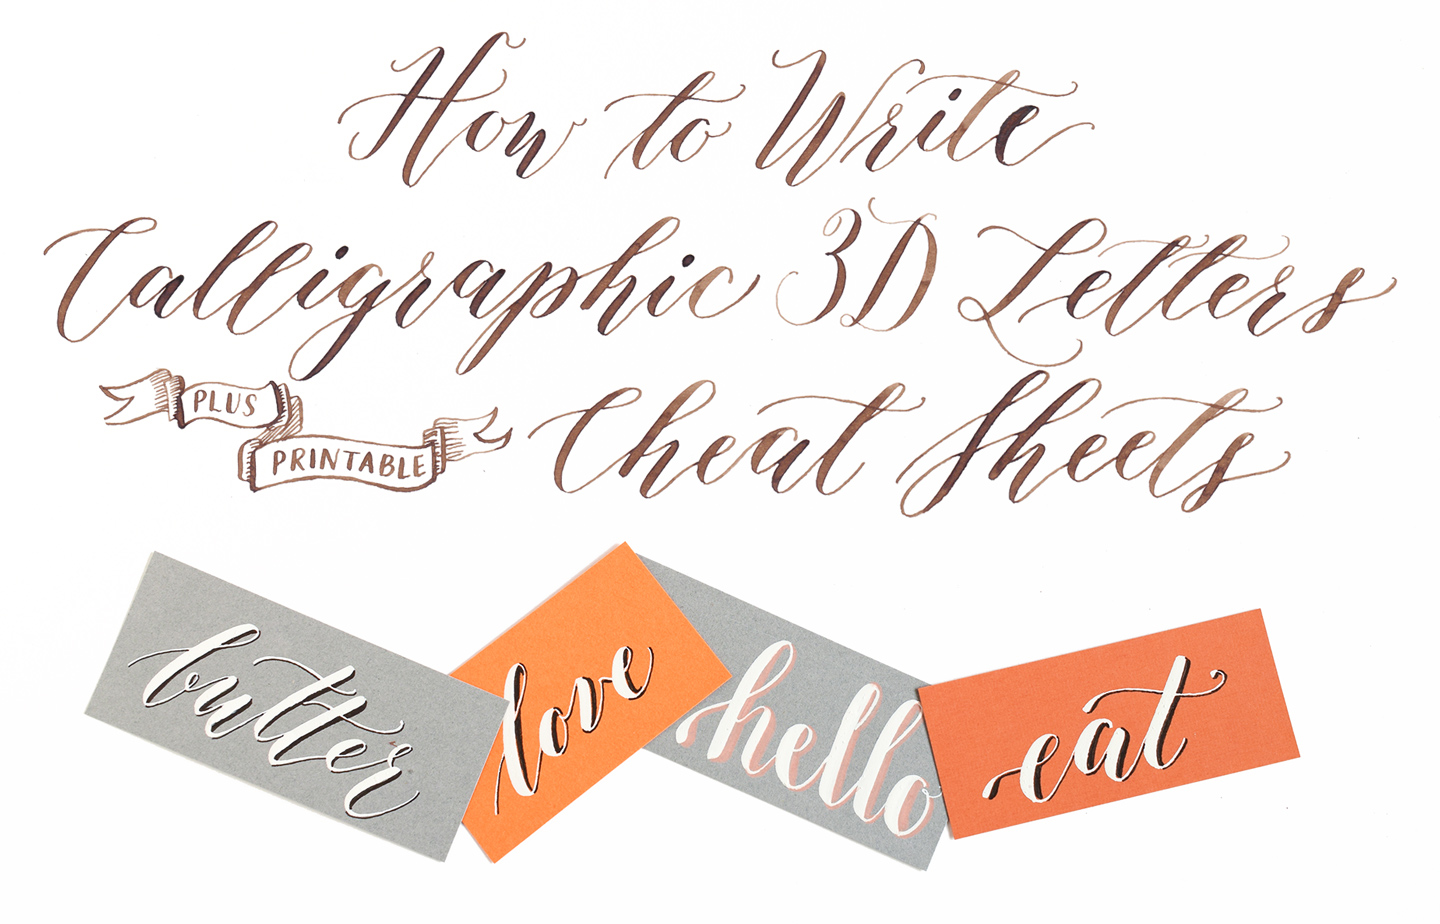 How to Write Calligraphic 3D Letters + Printable “Cheat Sheets”